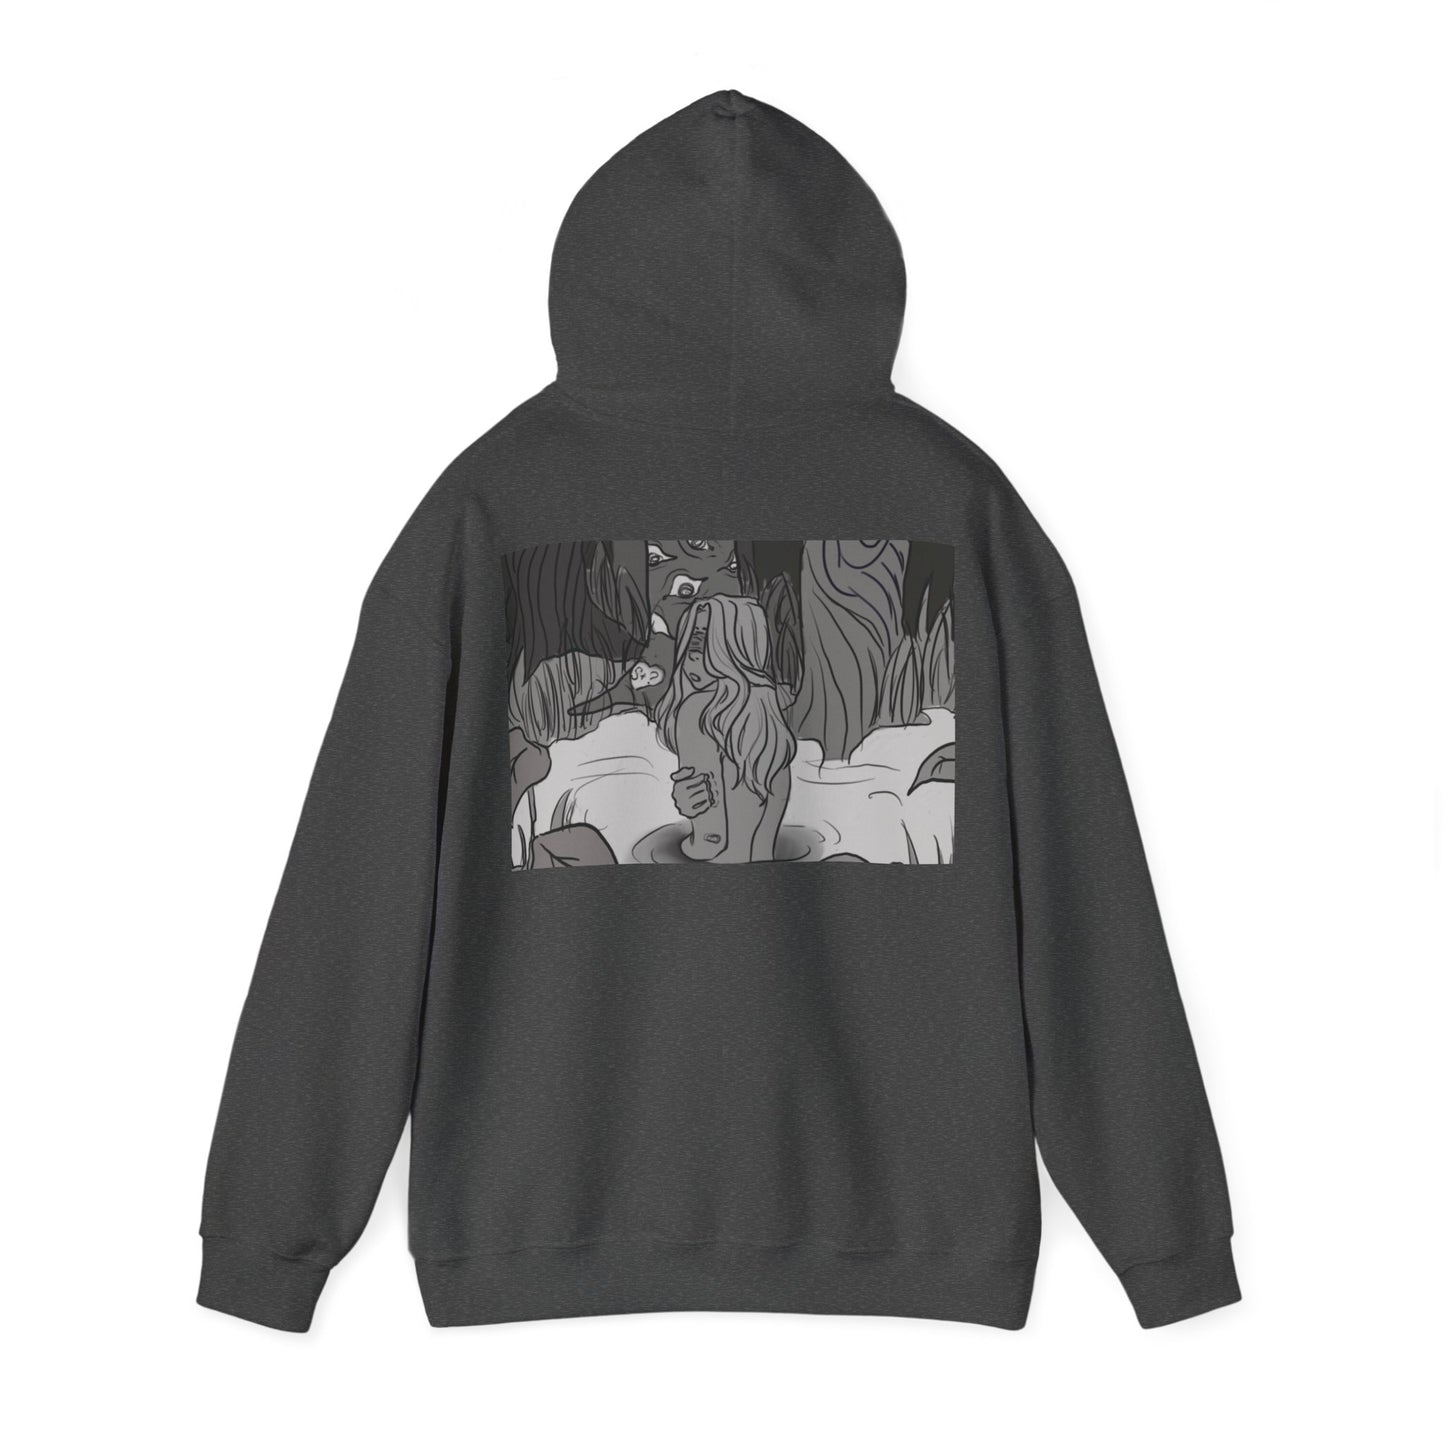 Unisex Heavy Blend Hoodie with The Unknown Design Comfort Fit8